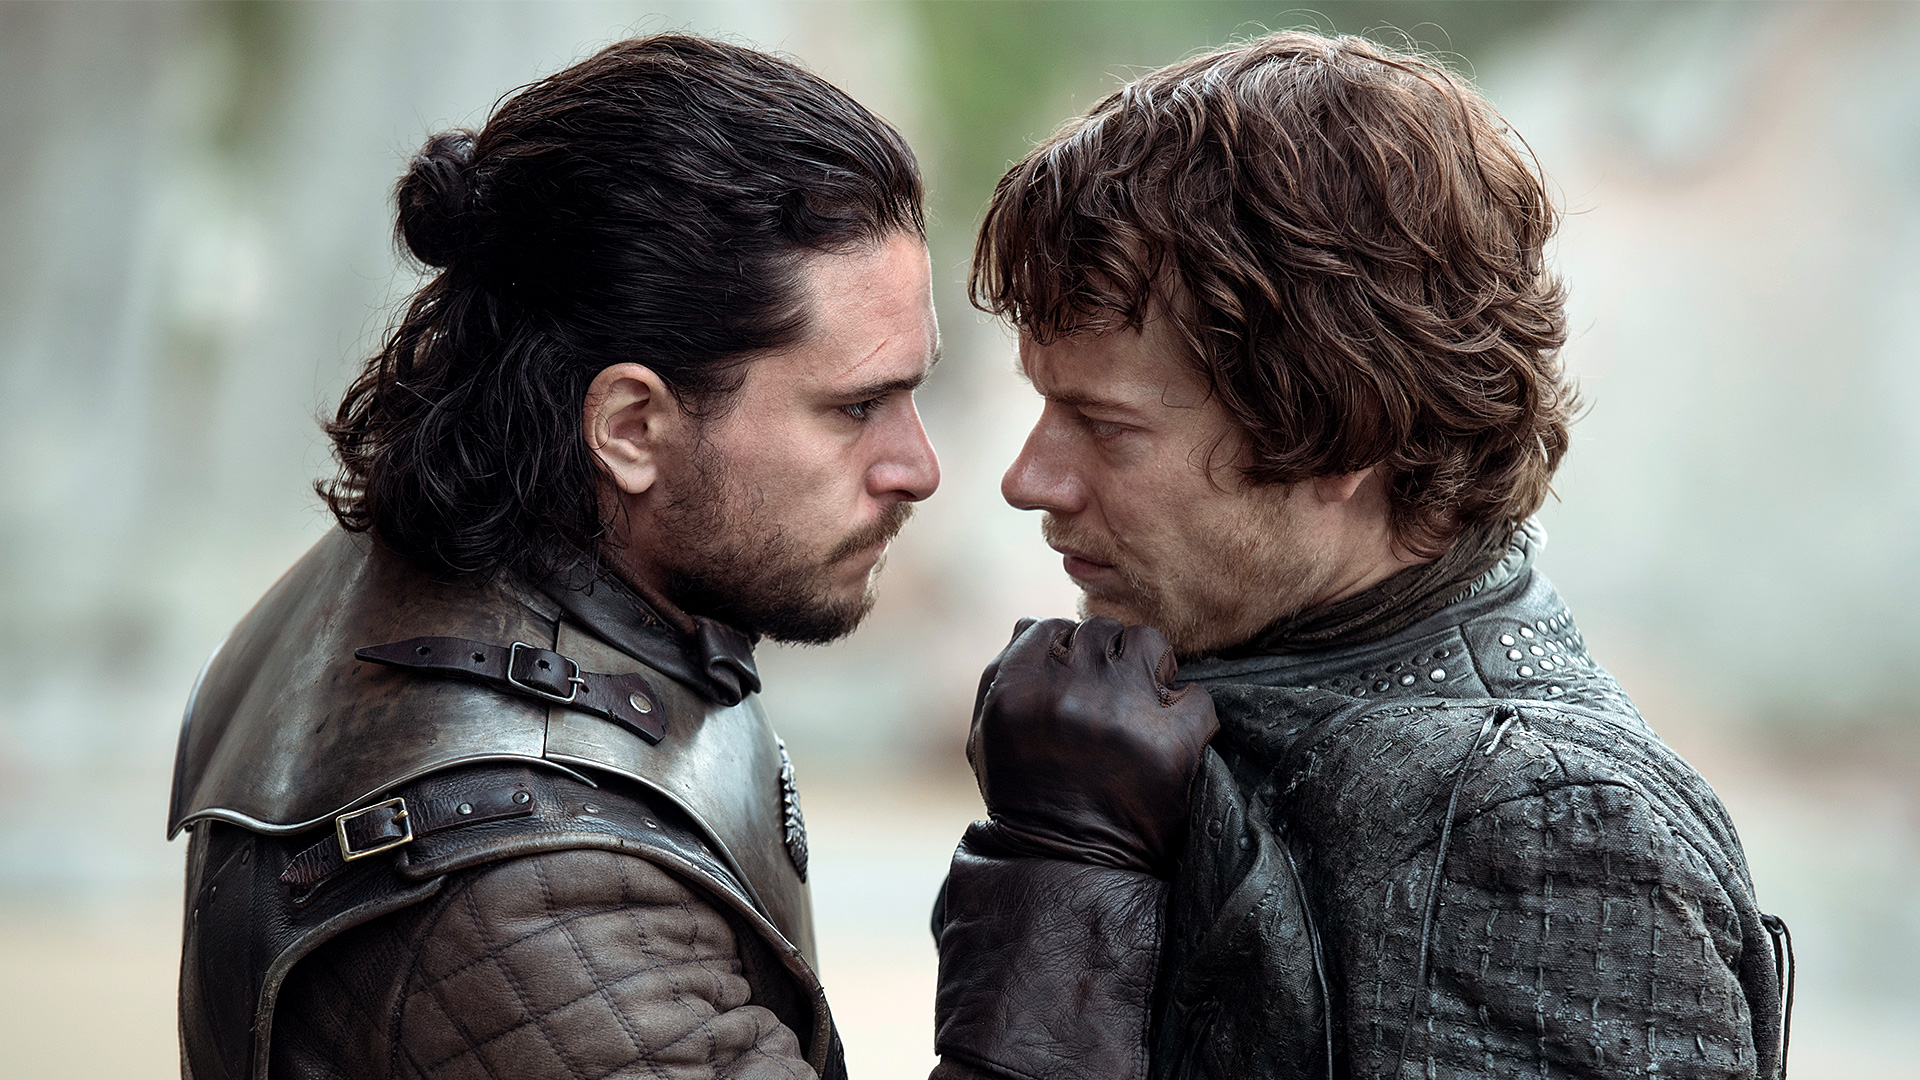 'Game of Thrones' continues on HBO